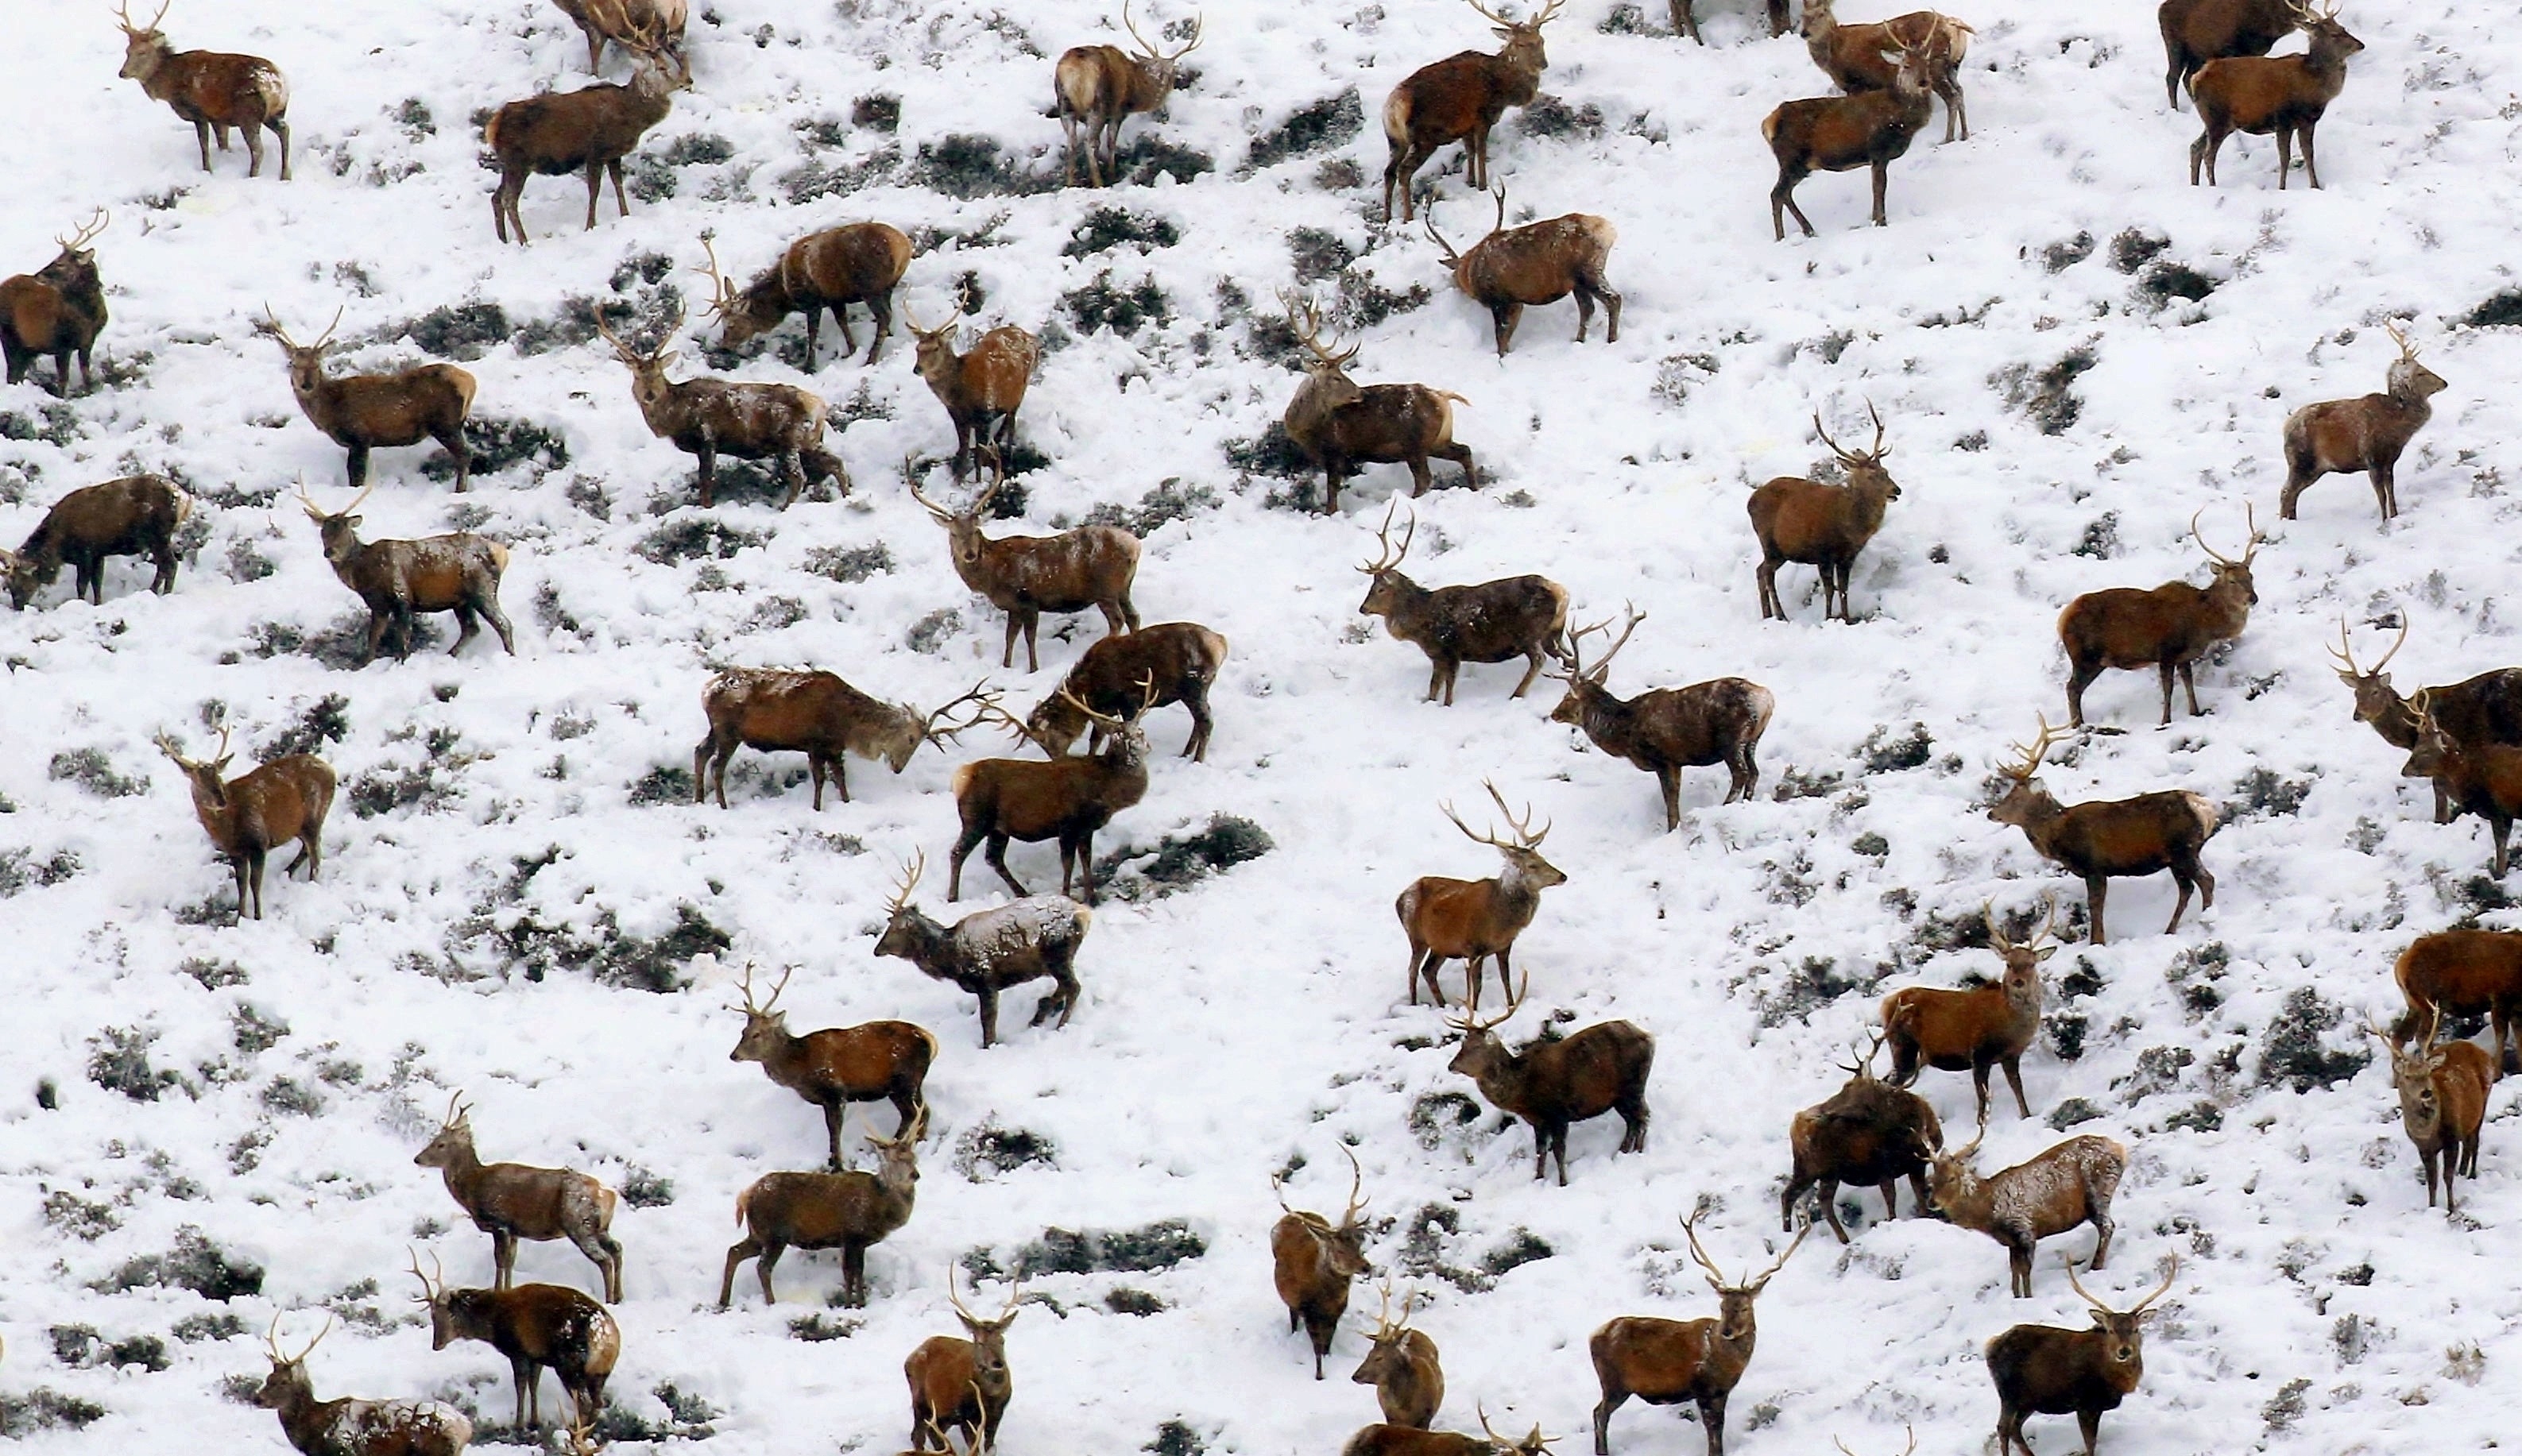 A large group of stags were captured by Allan Brown from Kirkcaldy, Fife, as they took shelter in a valley near Glenshee,